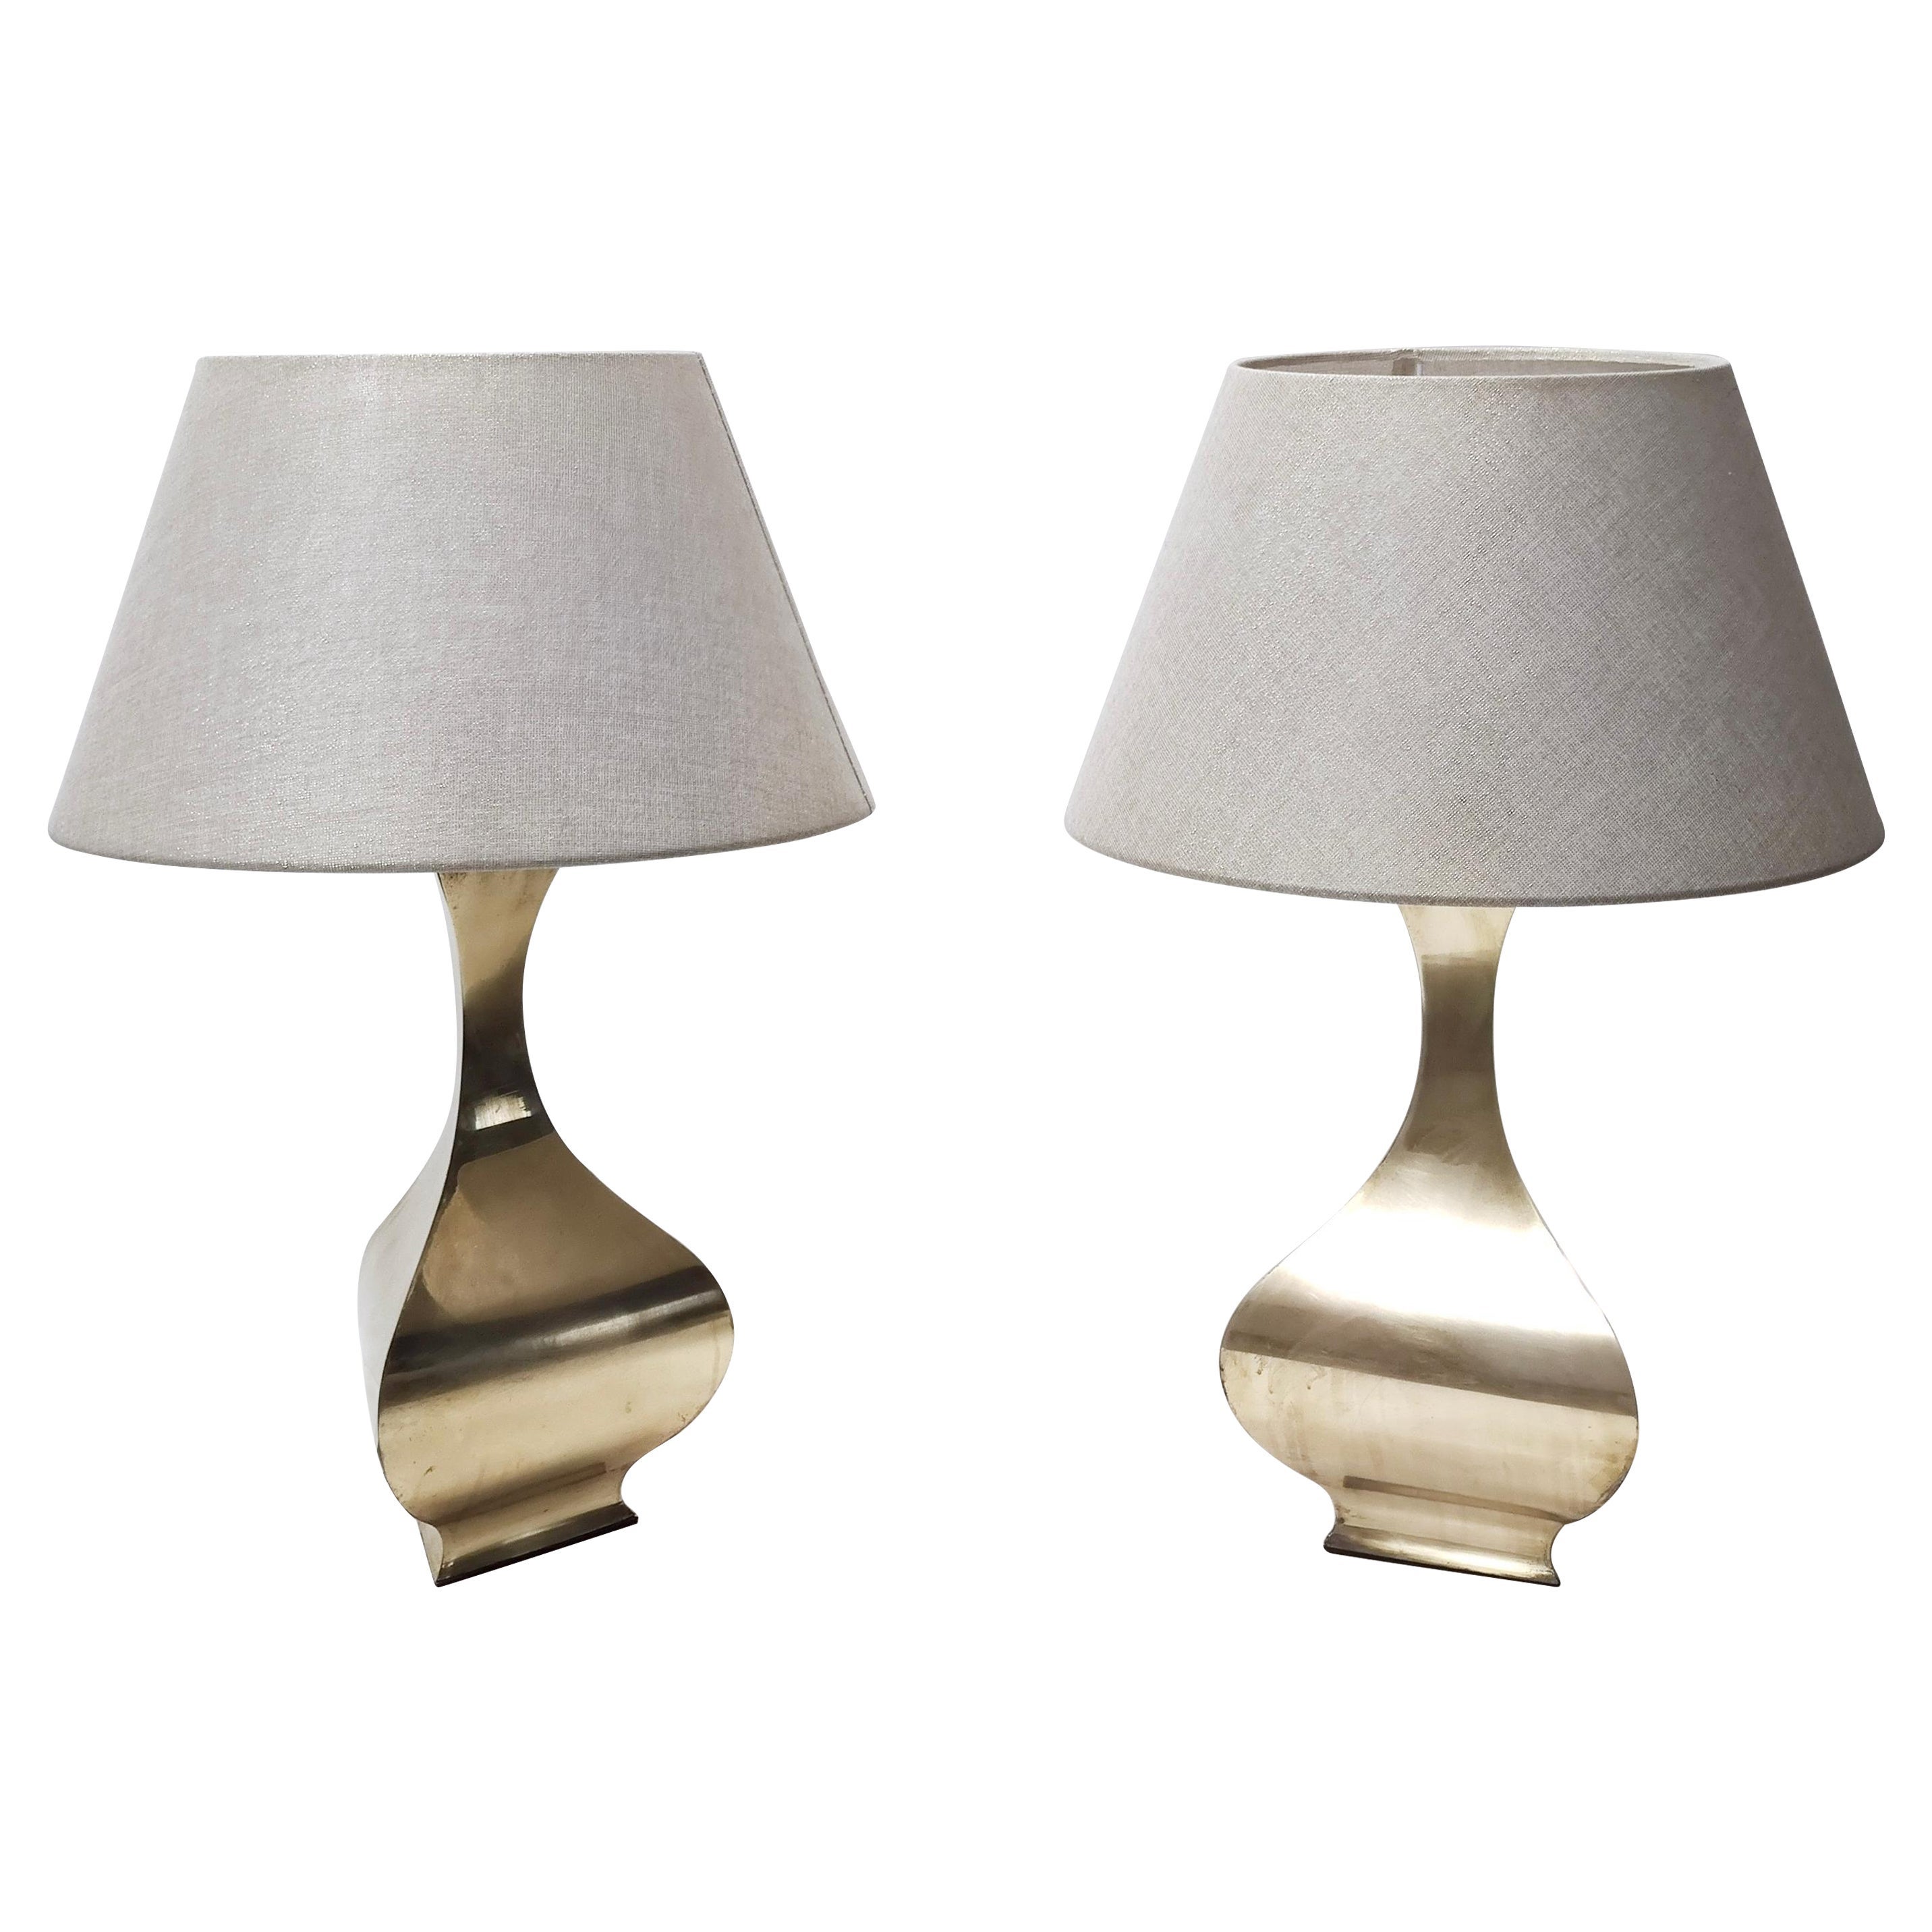 Pair of Postmodern Brass Table Lamps by Montagna Grillo and Tonello, Italy For Sale